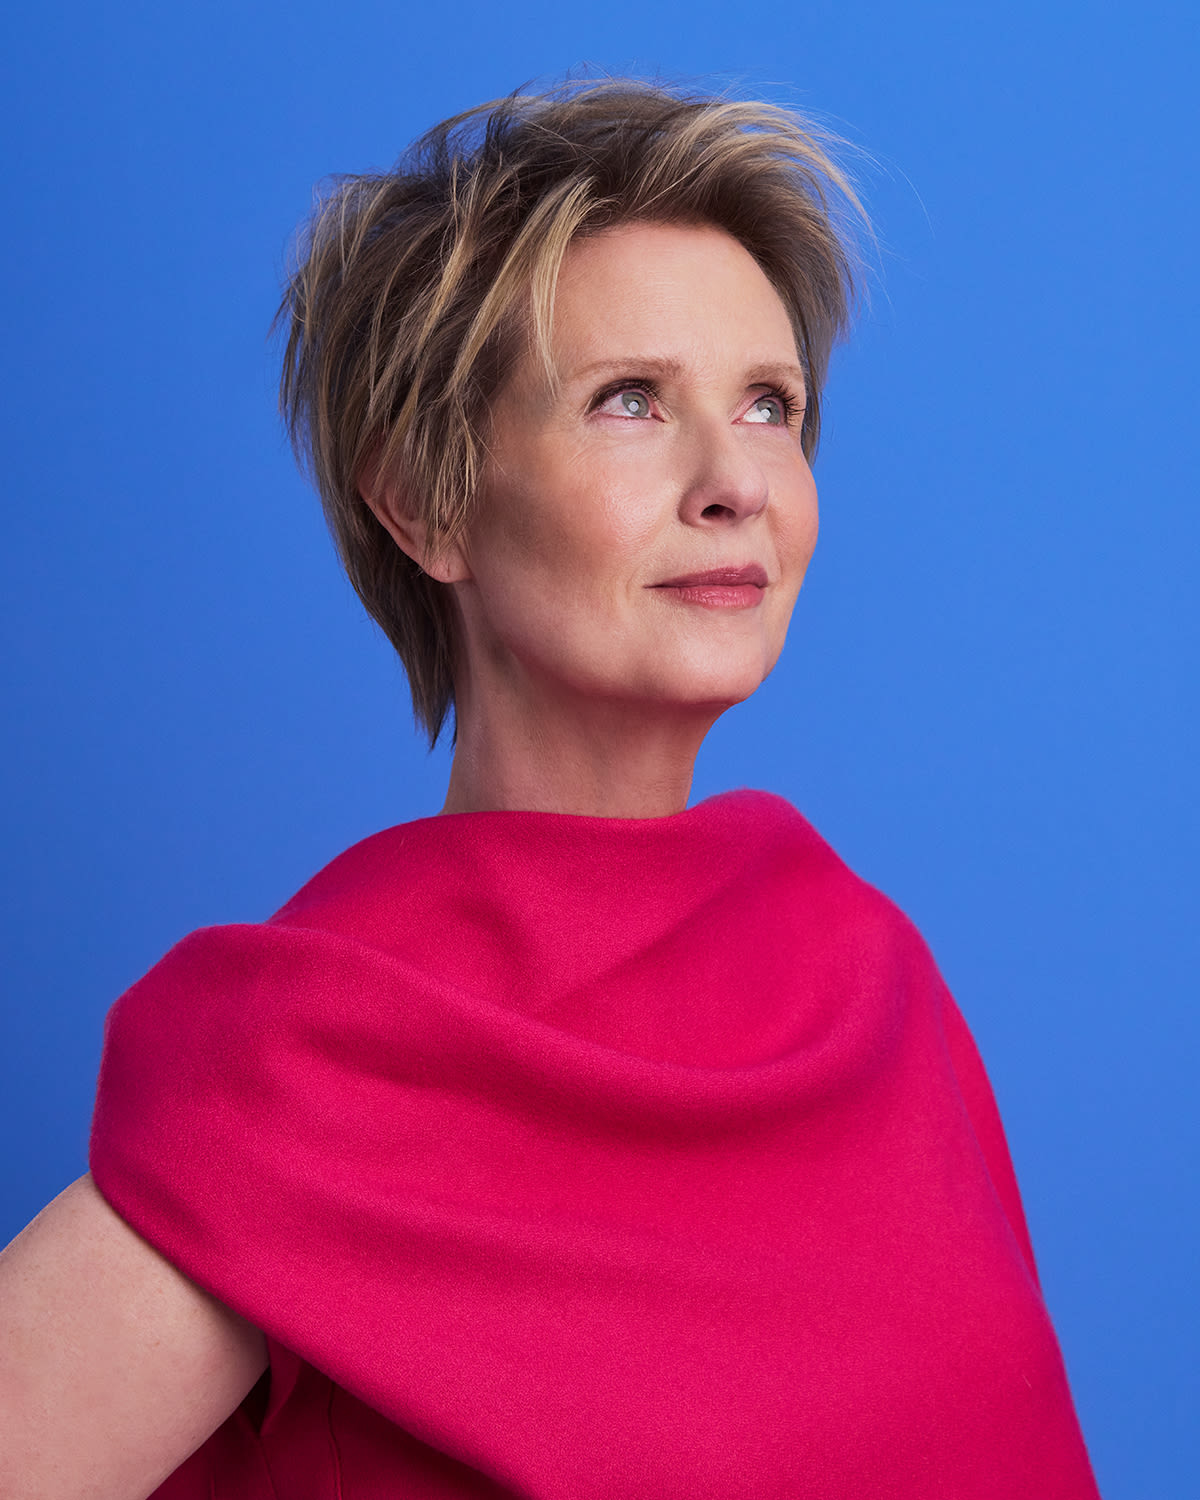 Cynthia Nixon on Miranda’s Evolution in ‘And Just Like That’, the End of Che Diaz and Her ‘Gilded Age’ Friendships